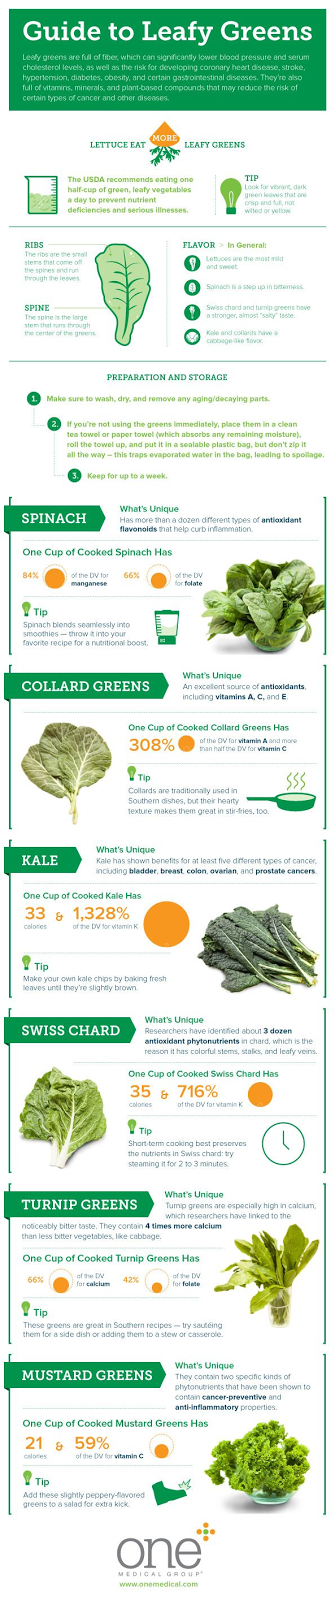 A Guide to Leafy Greens